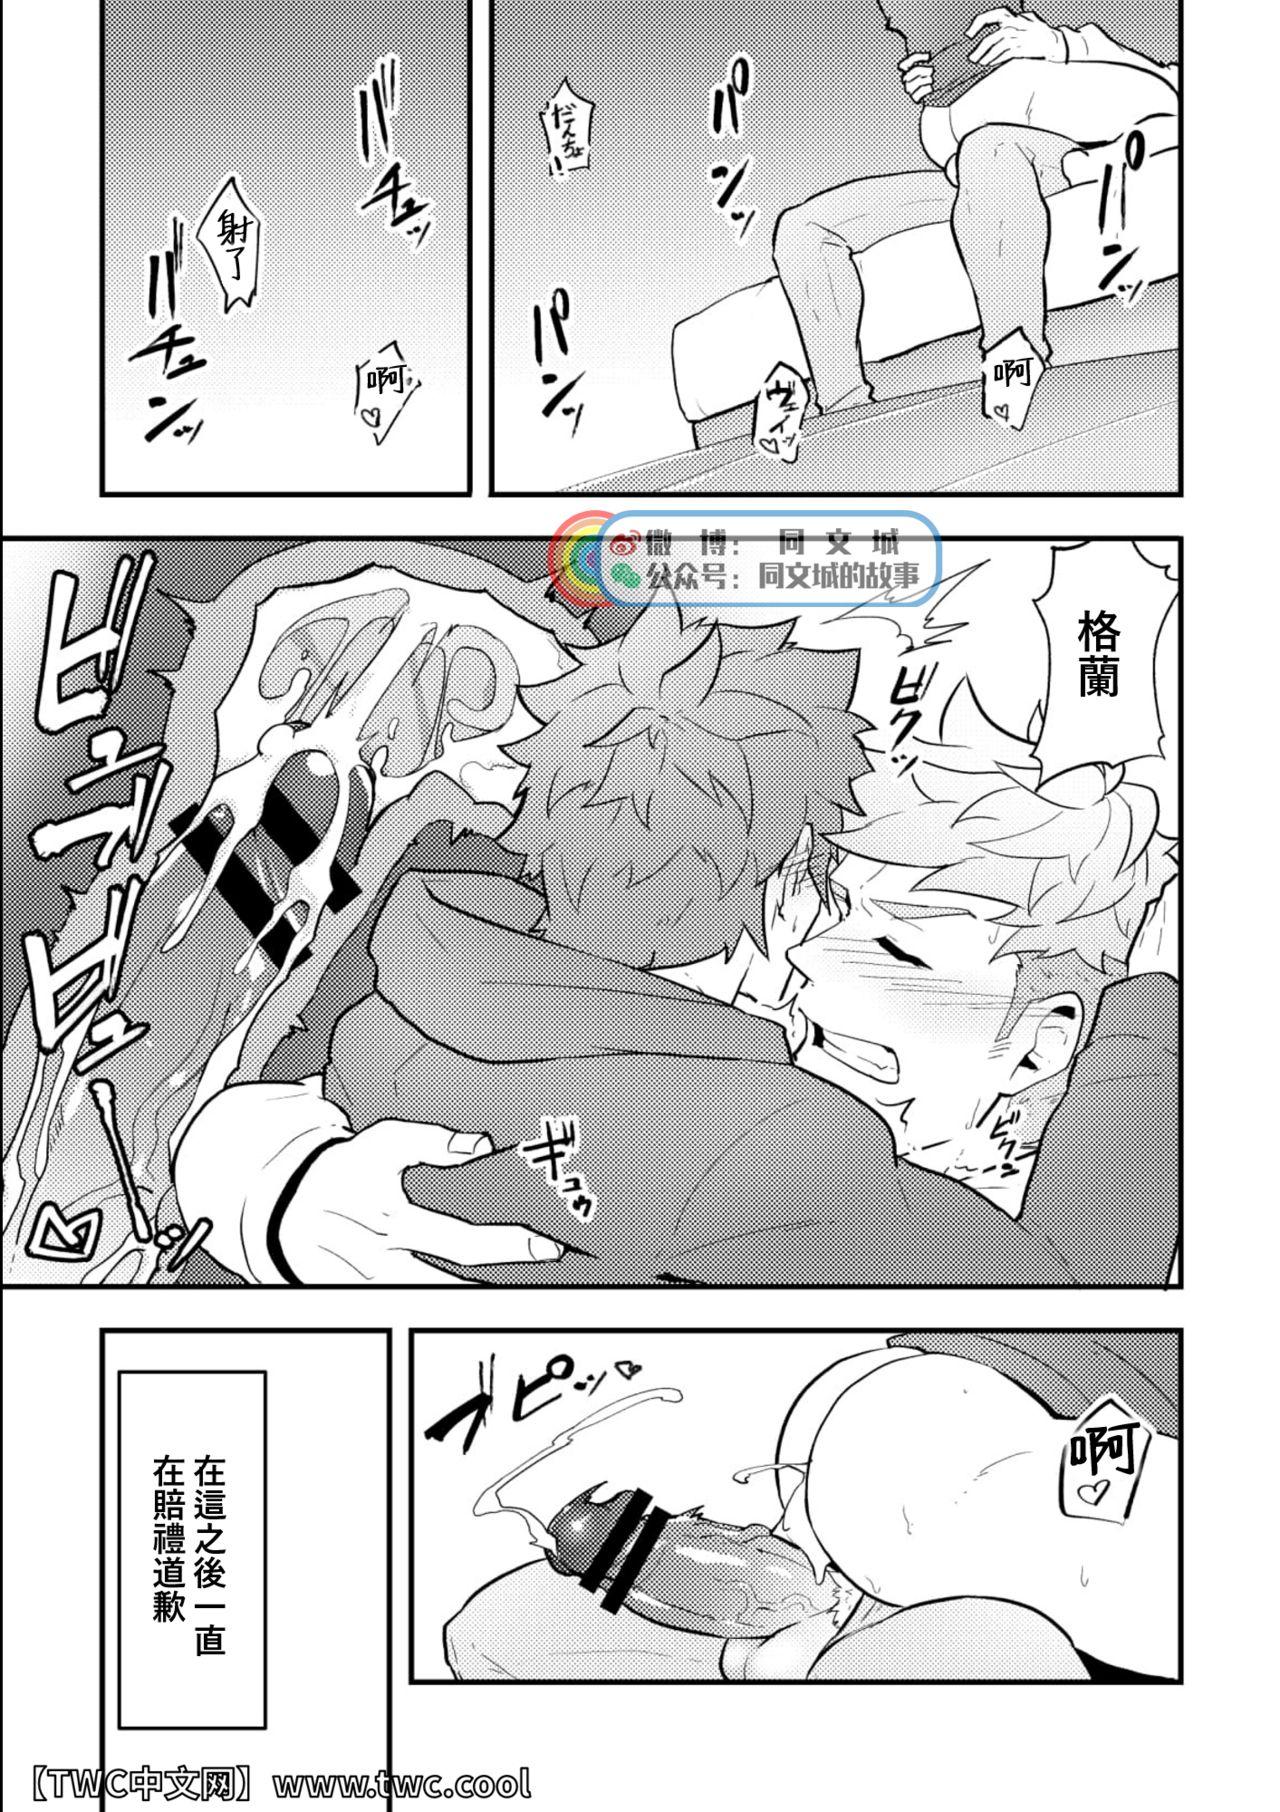 Butt Sex Onabe Hon C95 - Granblue fantasy Punch-out Pokemon | pocket monsters Gay Friend - Page 5